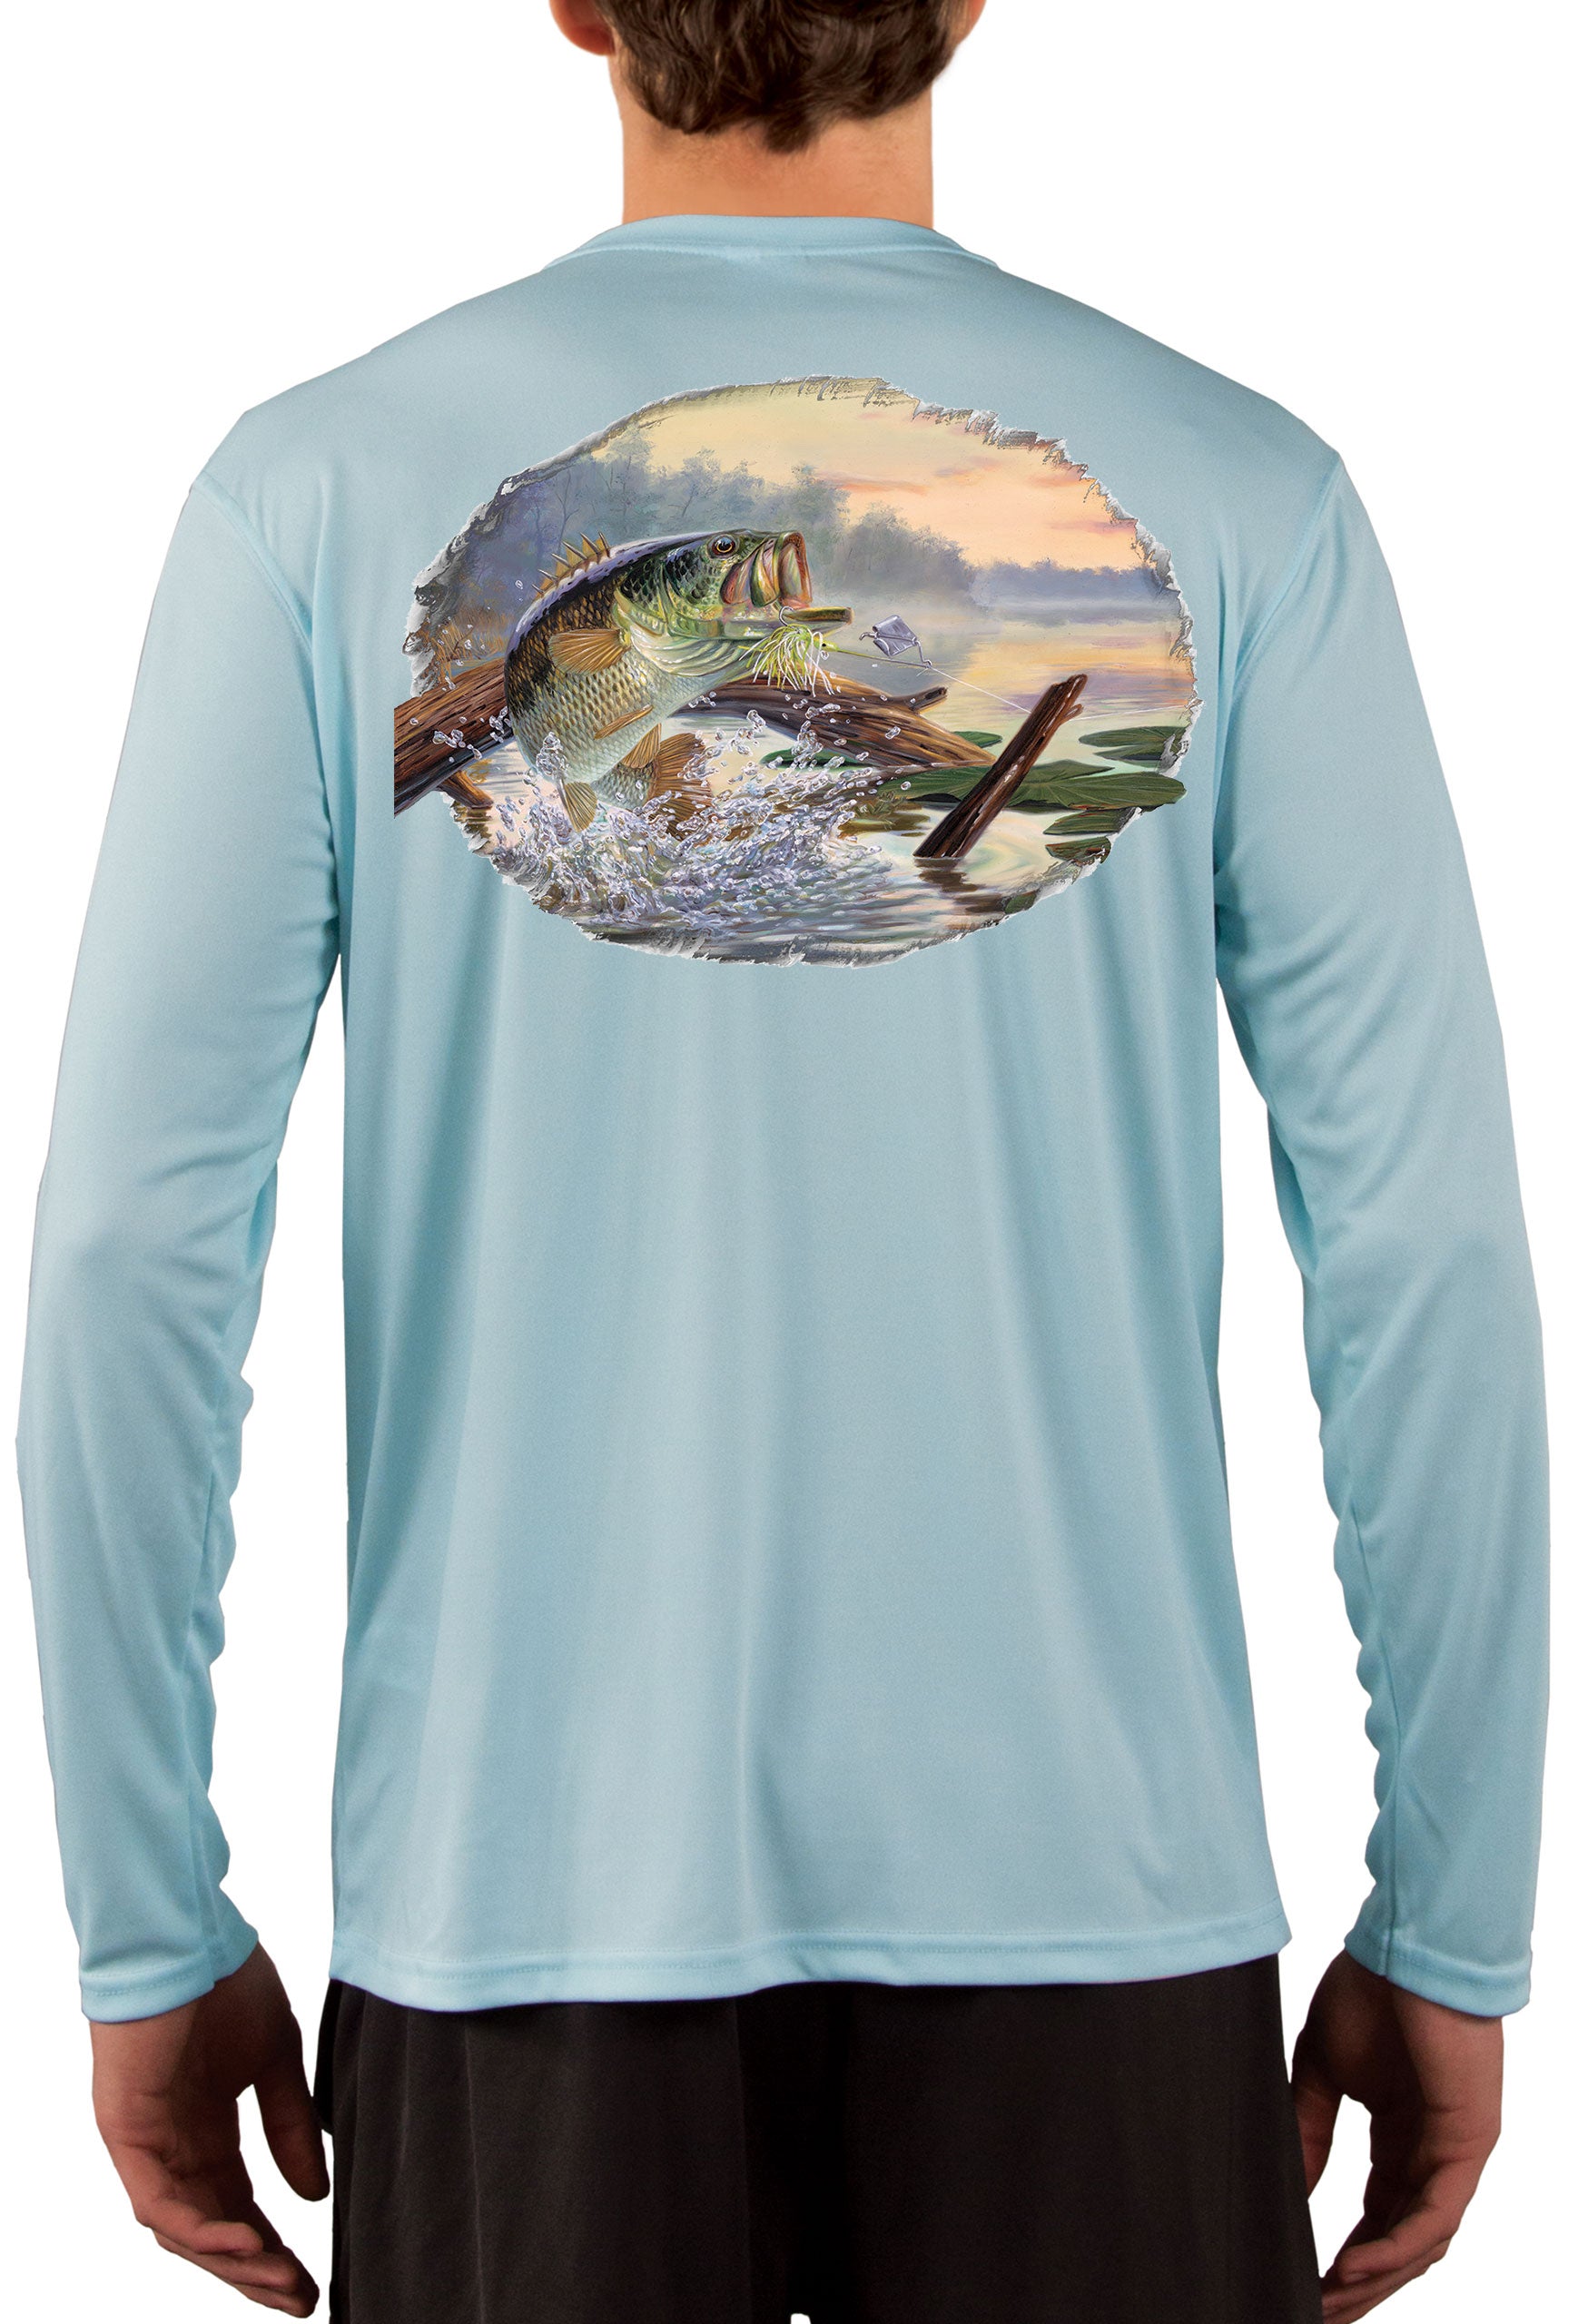 Large Mouth Bass Men's Fishing Shirts - Long Sleeve, Moisture Wicking, Non-fade Print, 50+ UPF Fabric UV Protection Ice Blue / Small